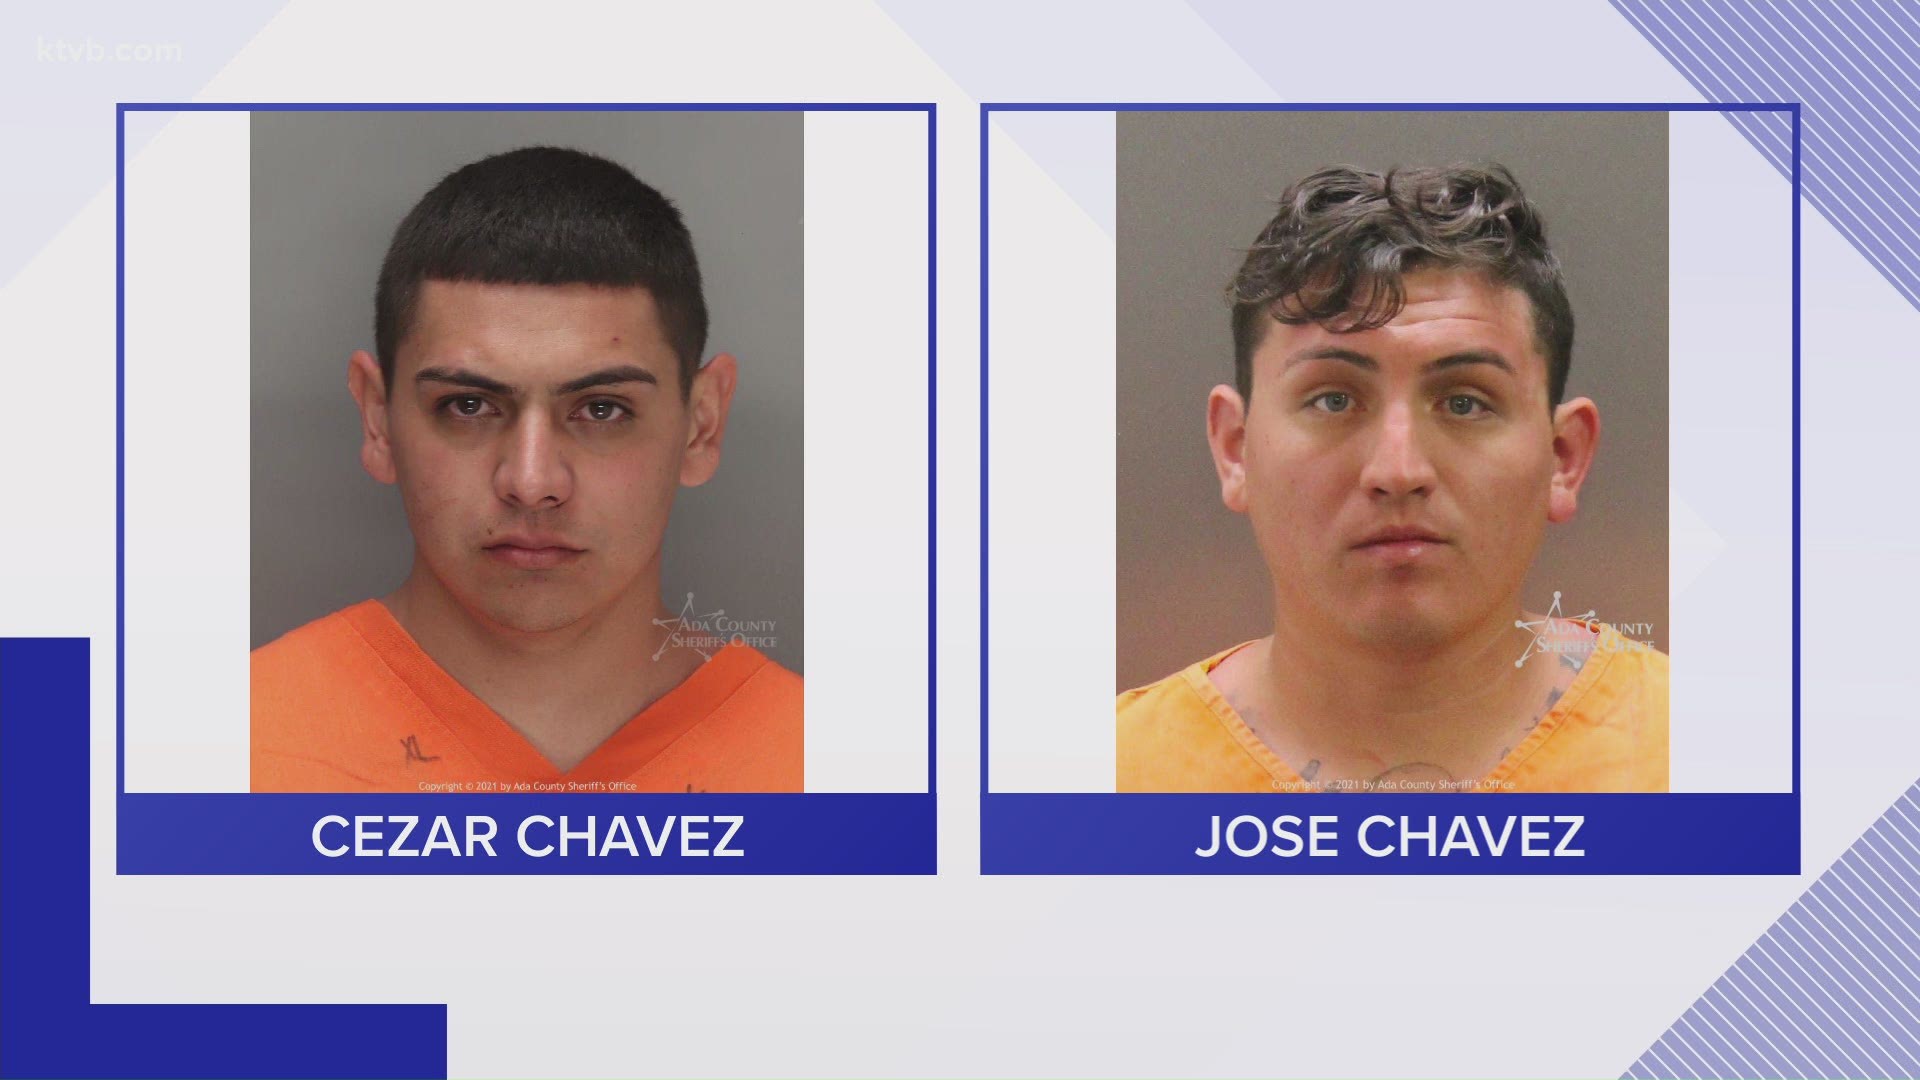 28-year-old Jose Jesus Chavez of Nampa and 22-year-old Cezar Thomas Chavez of Caldwell were arrested and charged with one felony count each of aggravated battery.